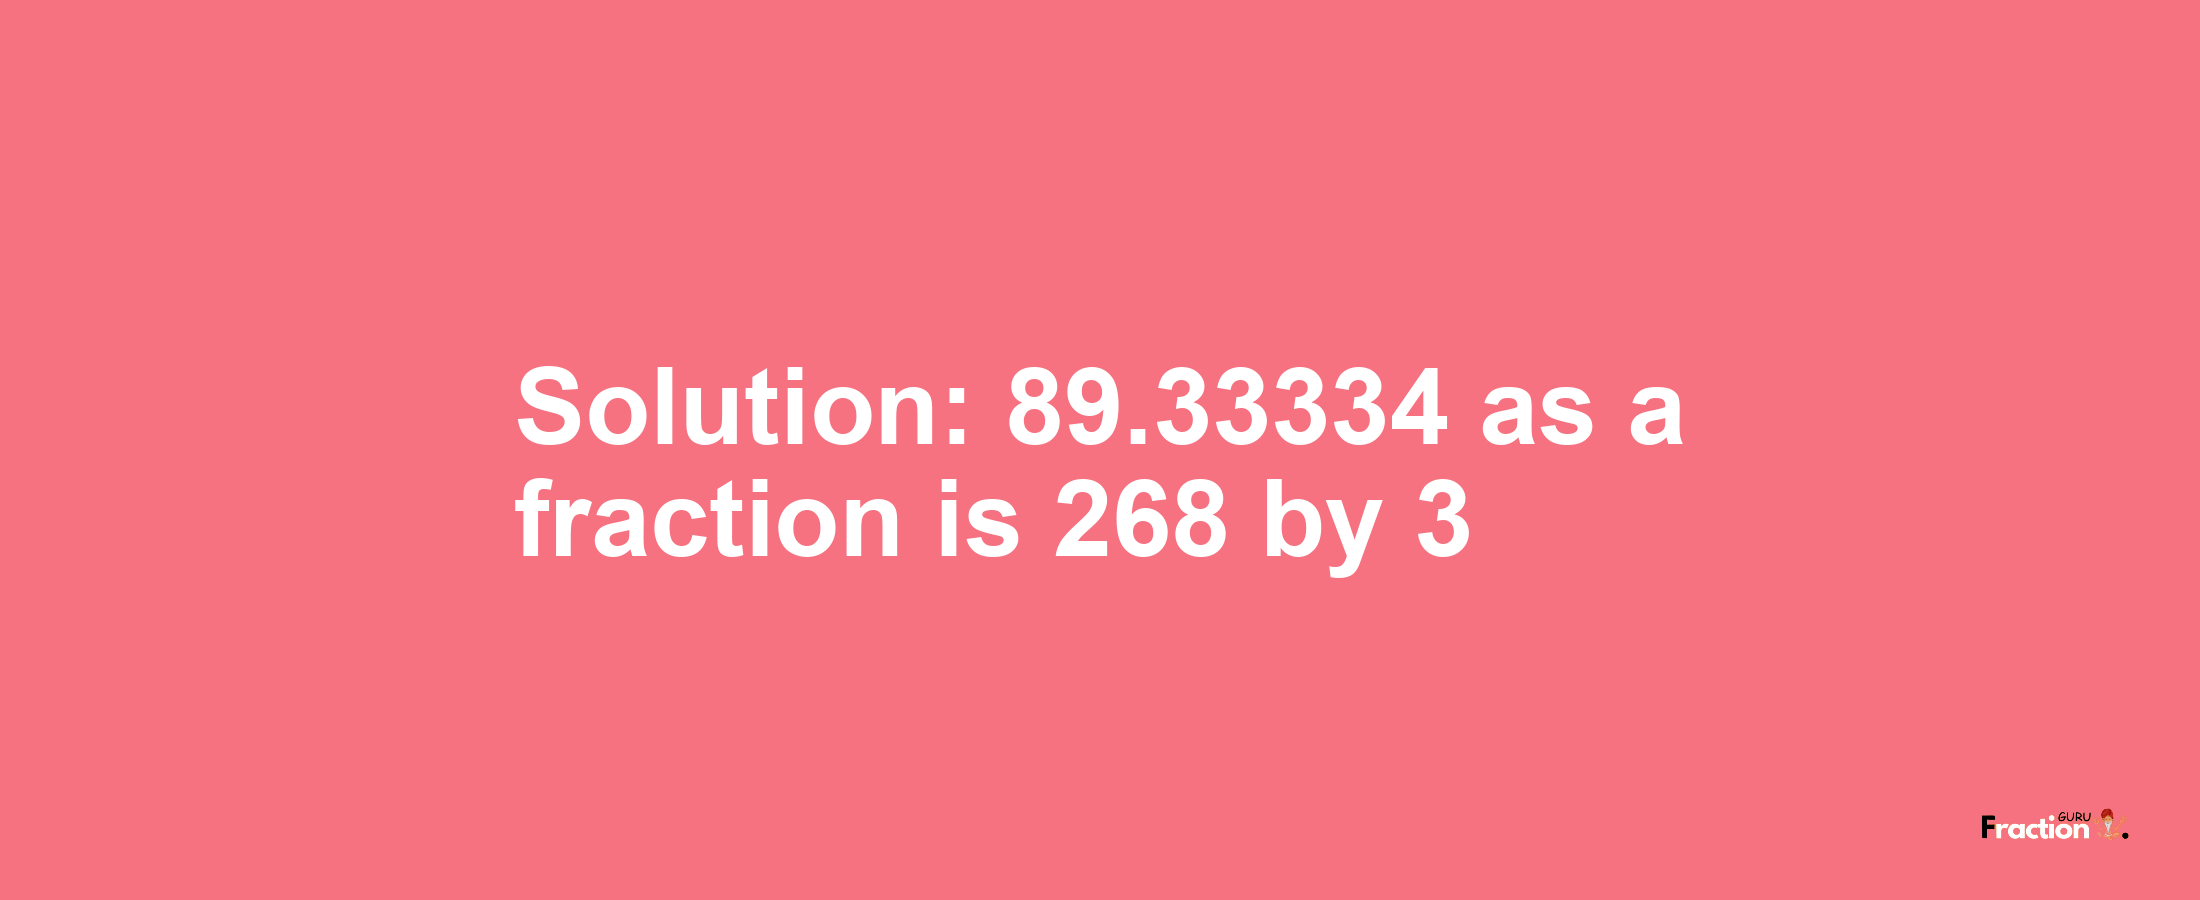 Solution:89.33334 as a fraction is 268/3